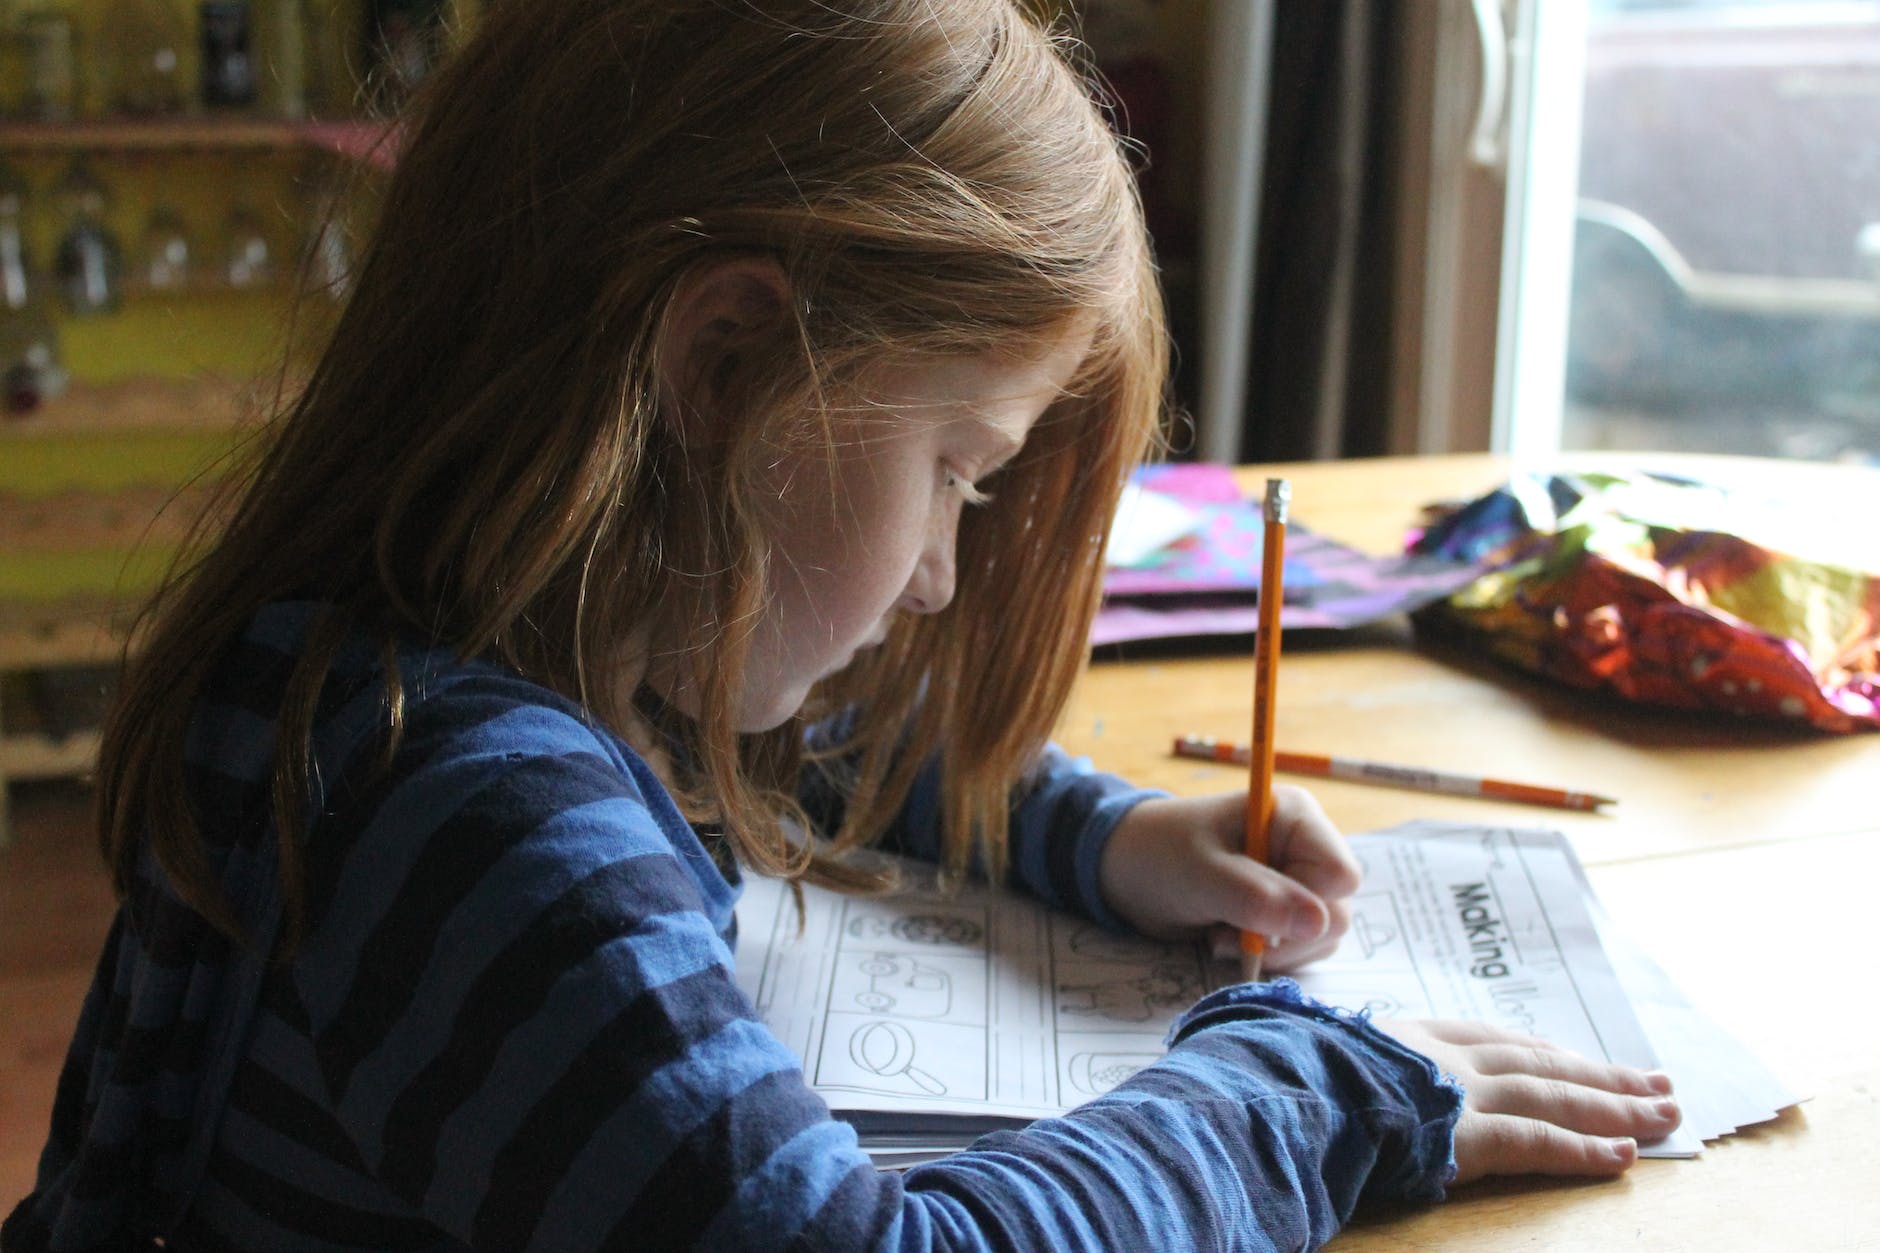 Parents want more of it, but is primary school homework worth fighting for?